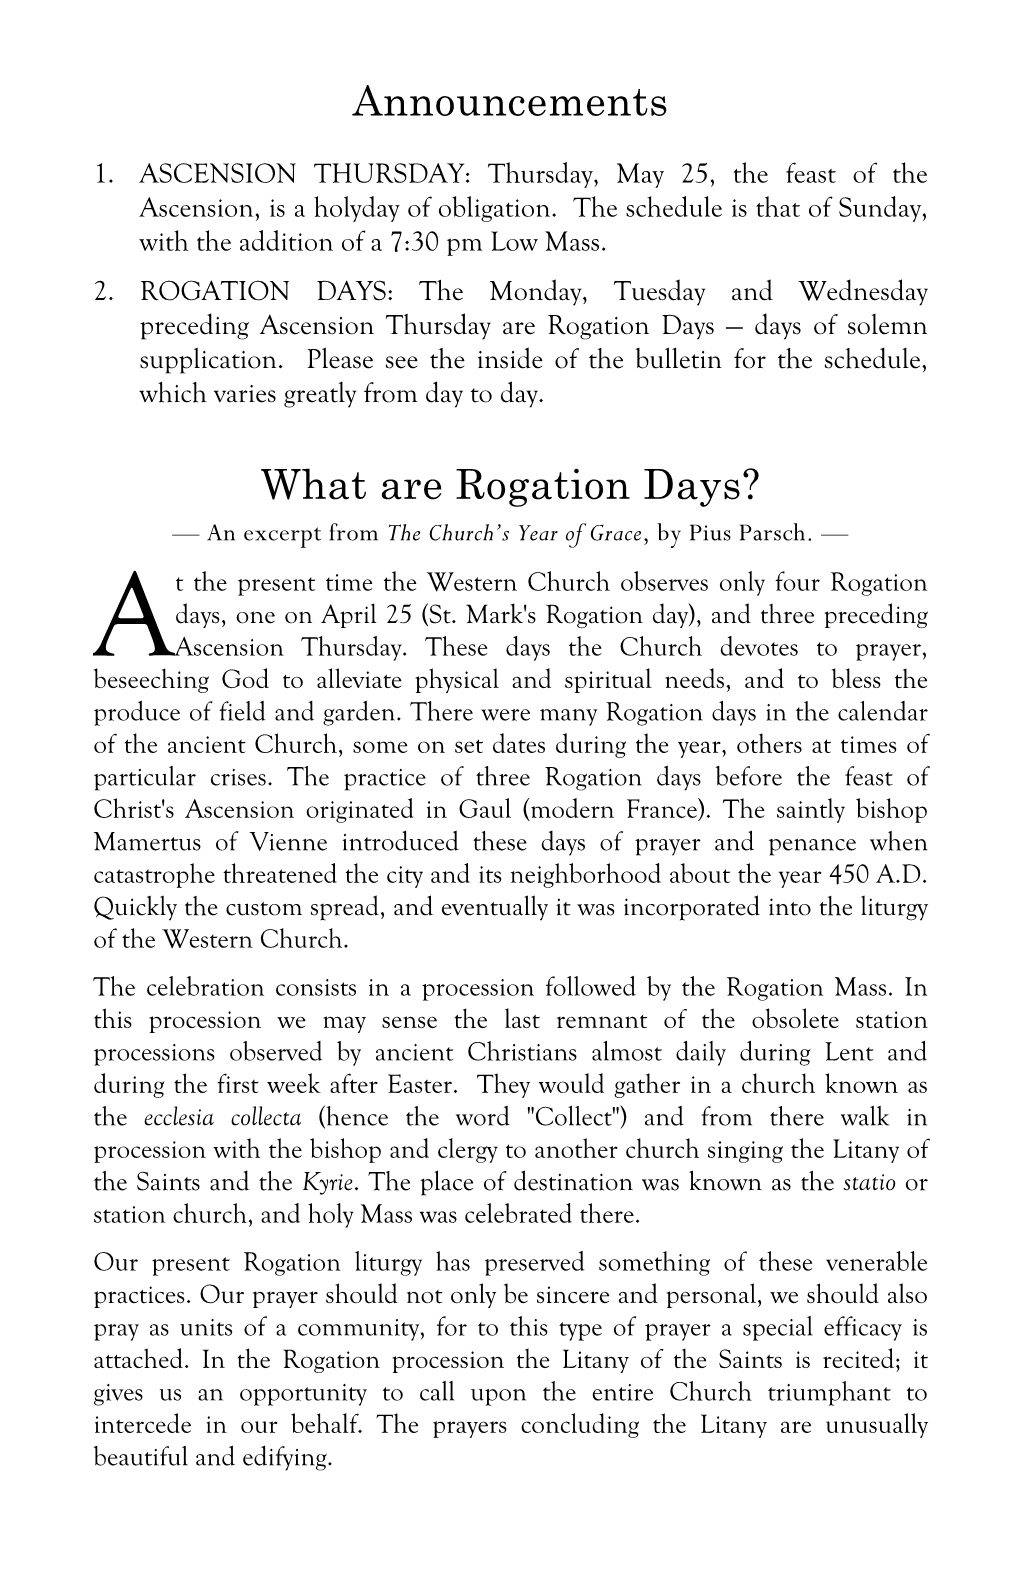 Announcements What Are Rogation Days?